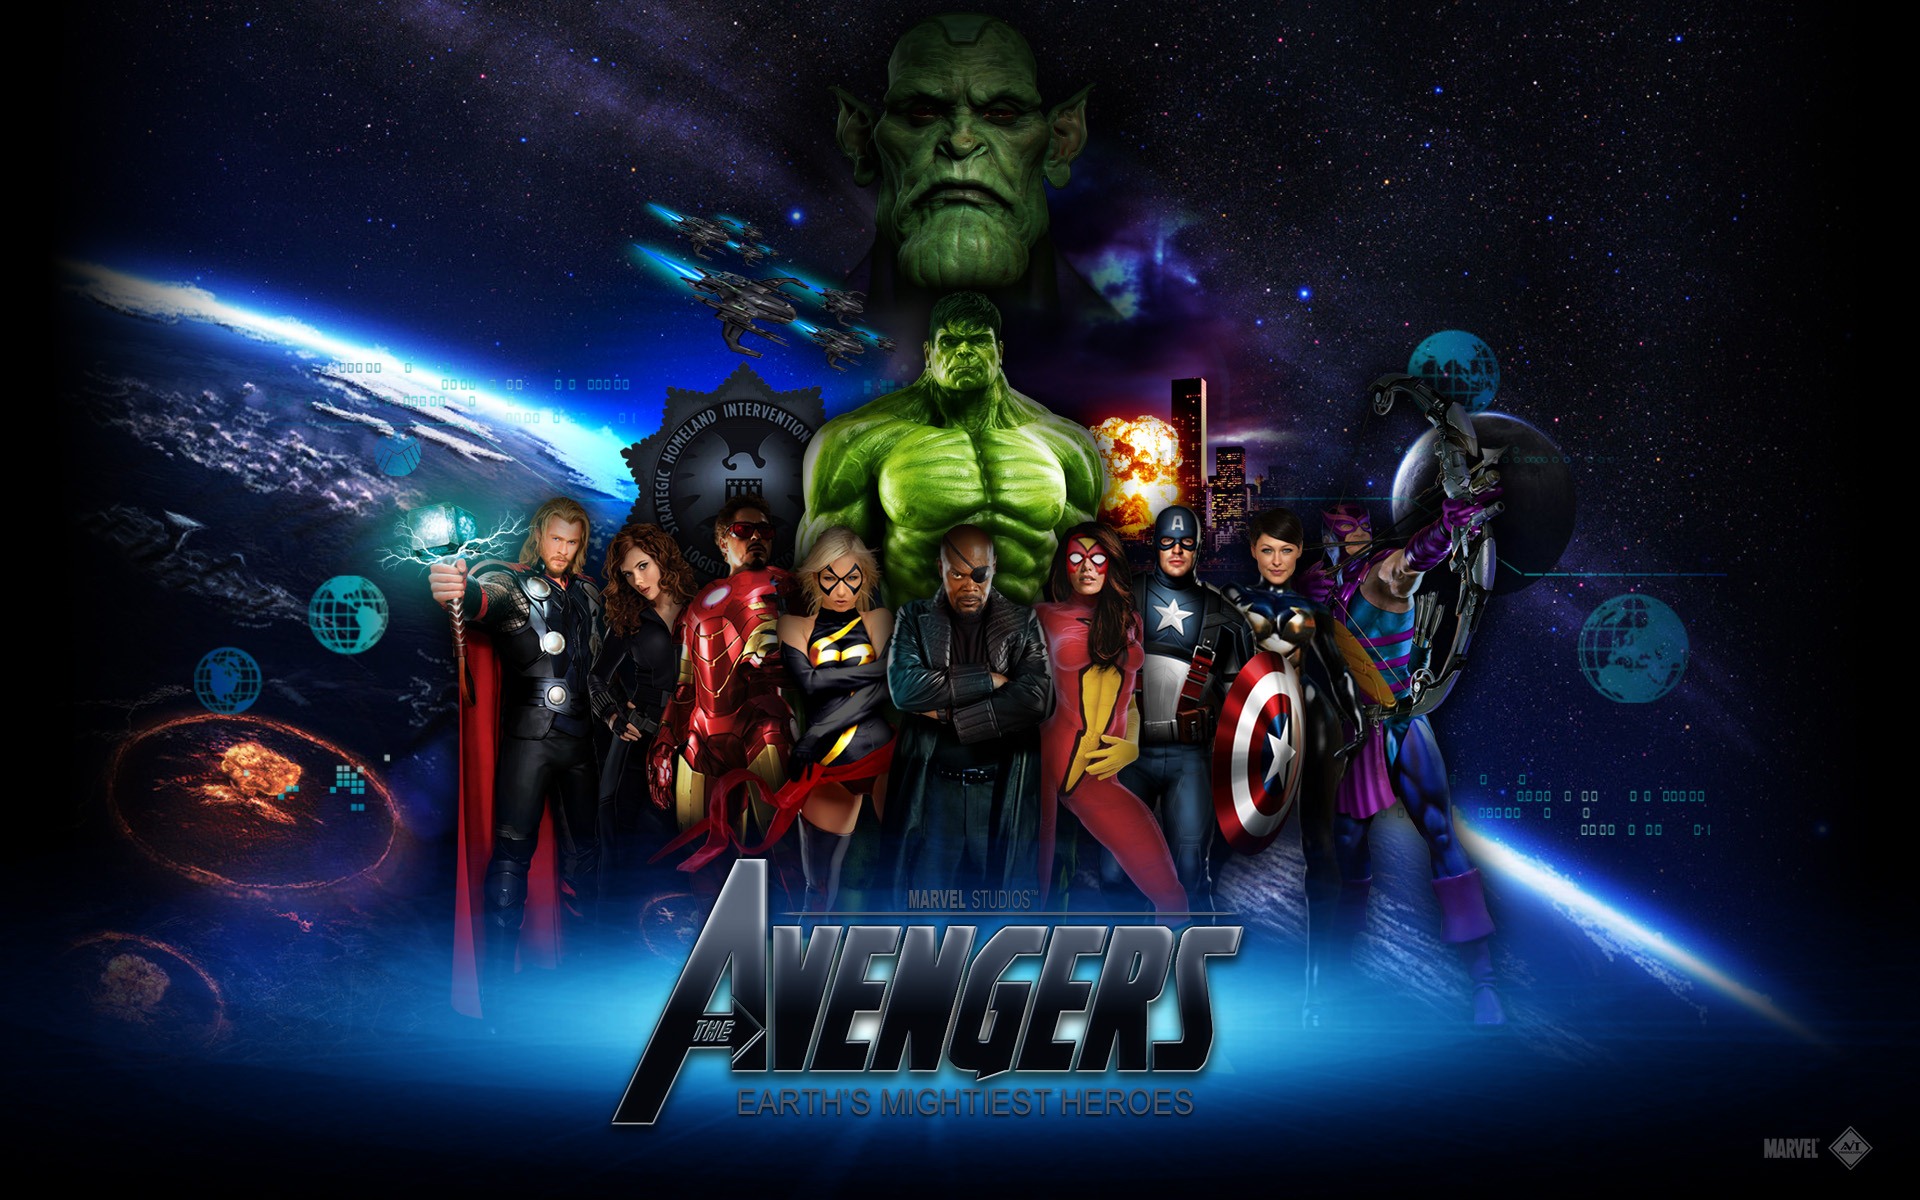 The Avengers 2012 HD wallpapers #12 - 1920x1200